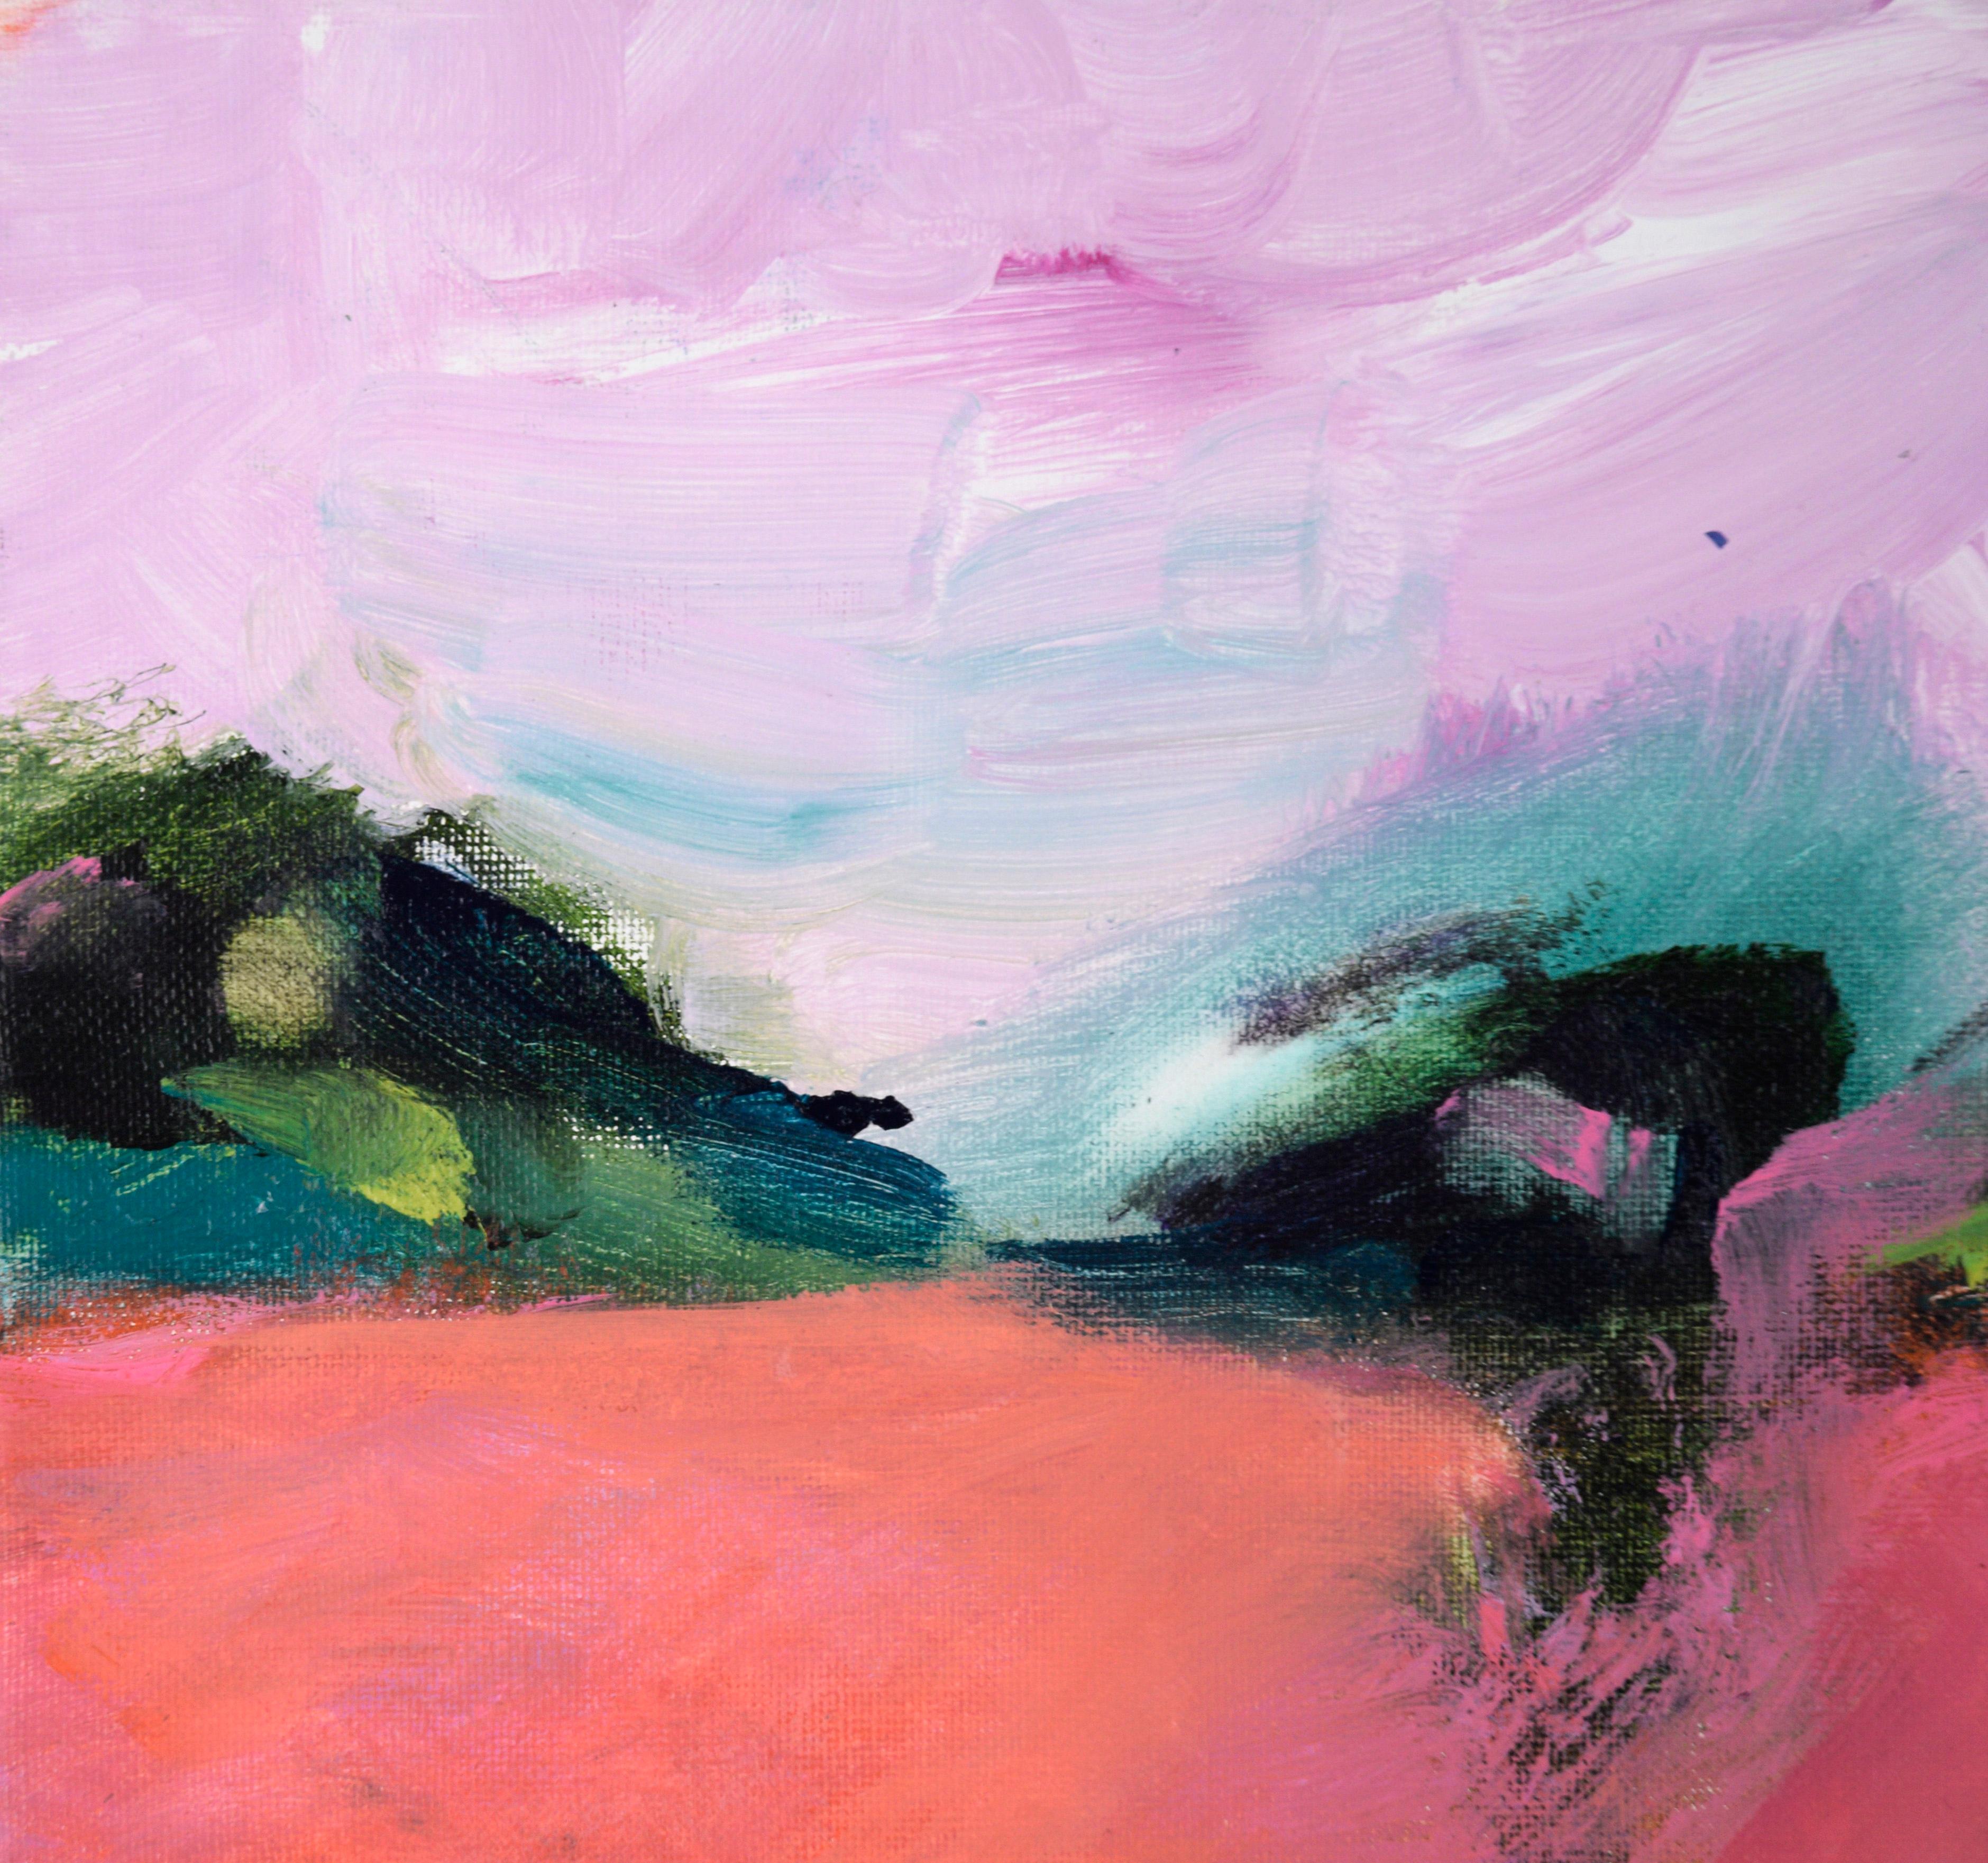 Pink Sky and Magenta Field - Abstracted Landscape in Acrylic on Canvas - Painting by Ilana Ingber